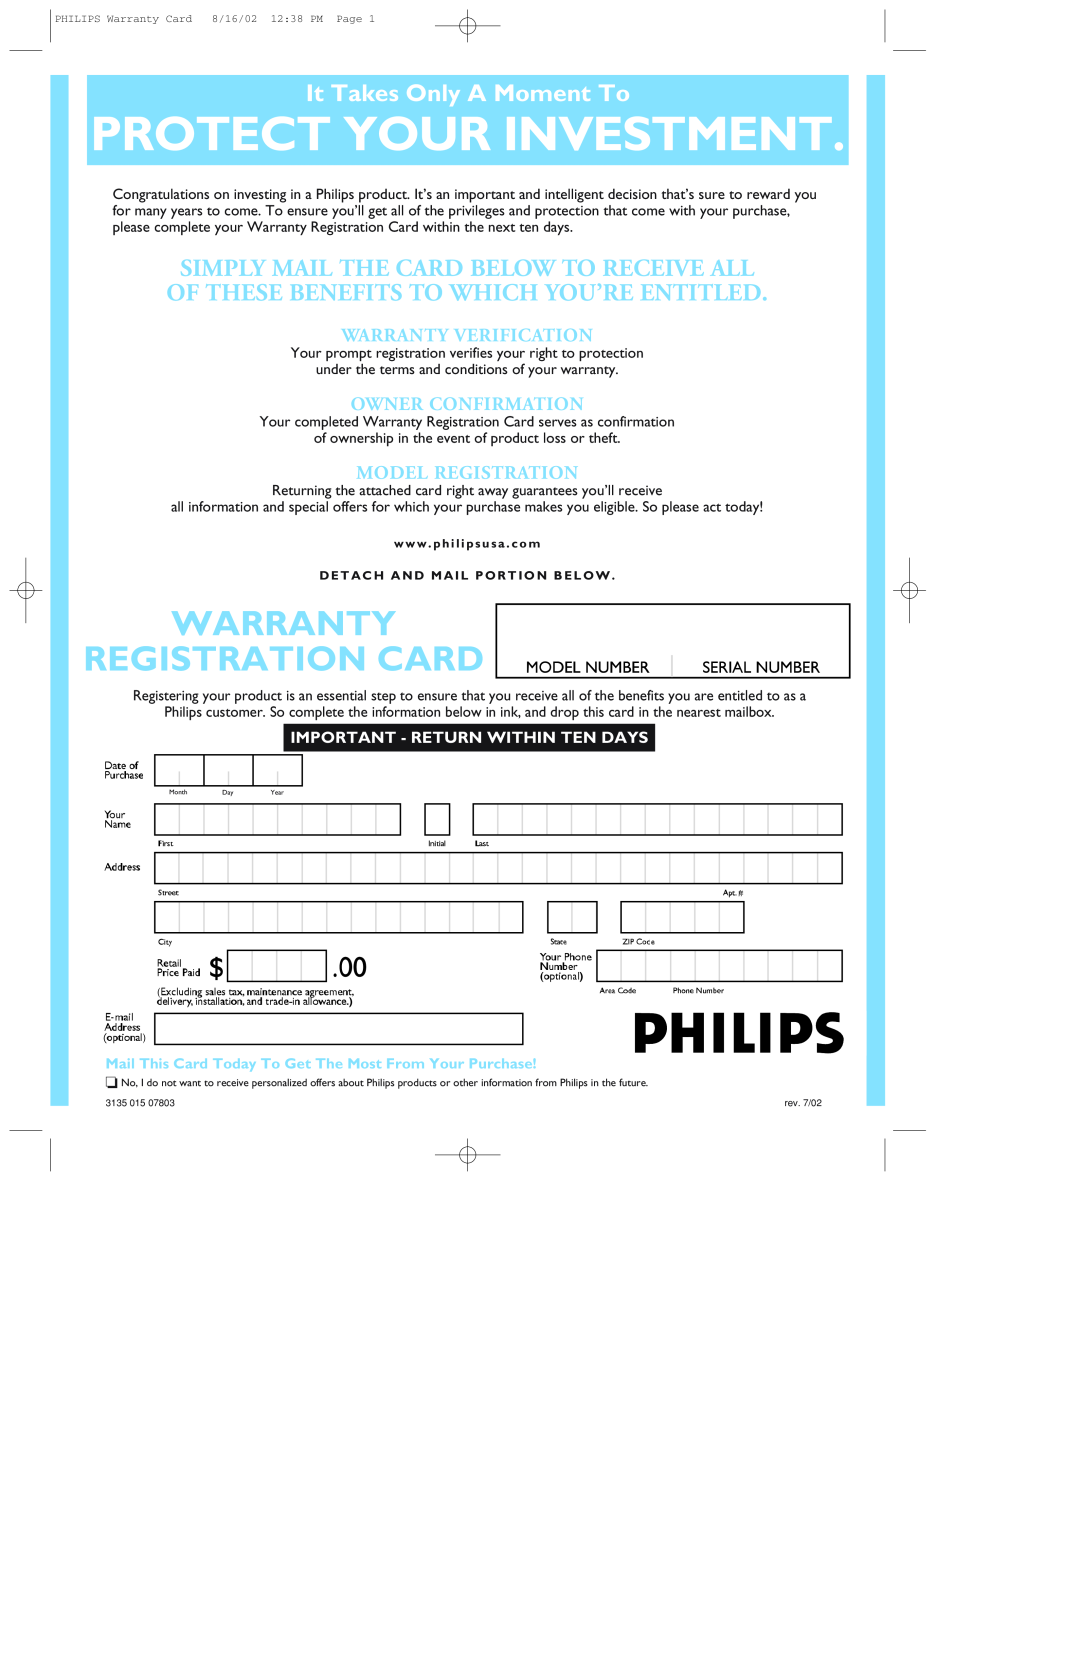 Philips 107E5, 109F5 Protect Your Investment, Warranty Registration Card, It Takes Only A Moment To, Warranty Verification 